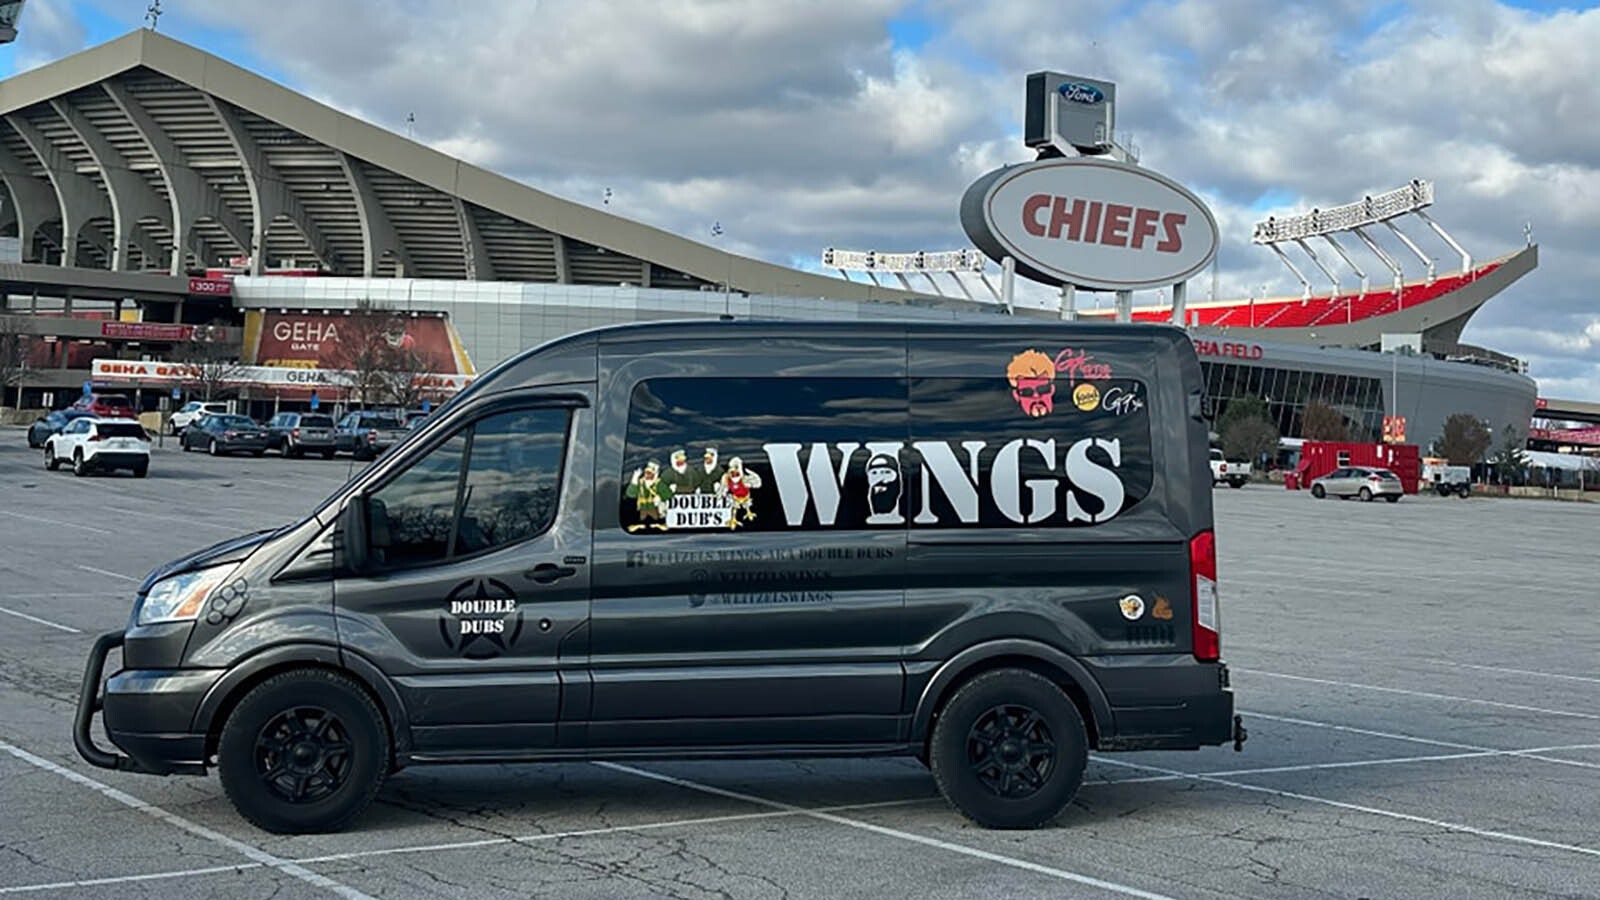 The Weitzels Wings road trip crew arrive to tailgate last weekend's Buffalo Bills road game at Kansas City, a thrilling win over the defending Super Bowl champs.